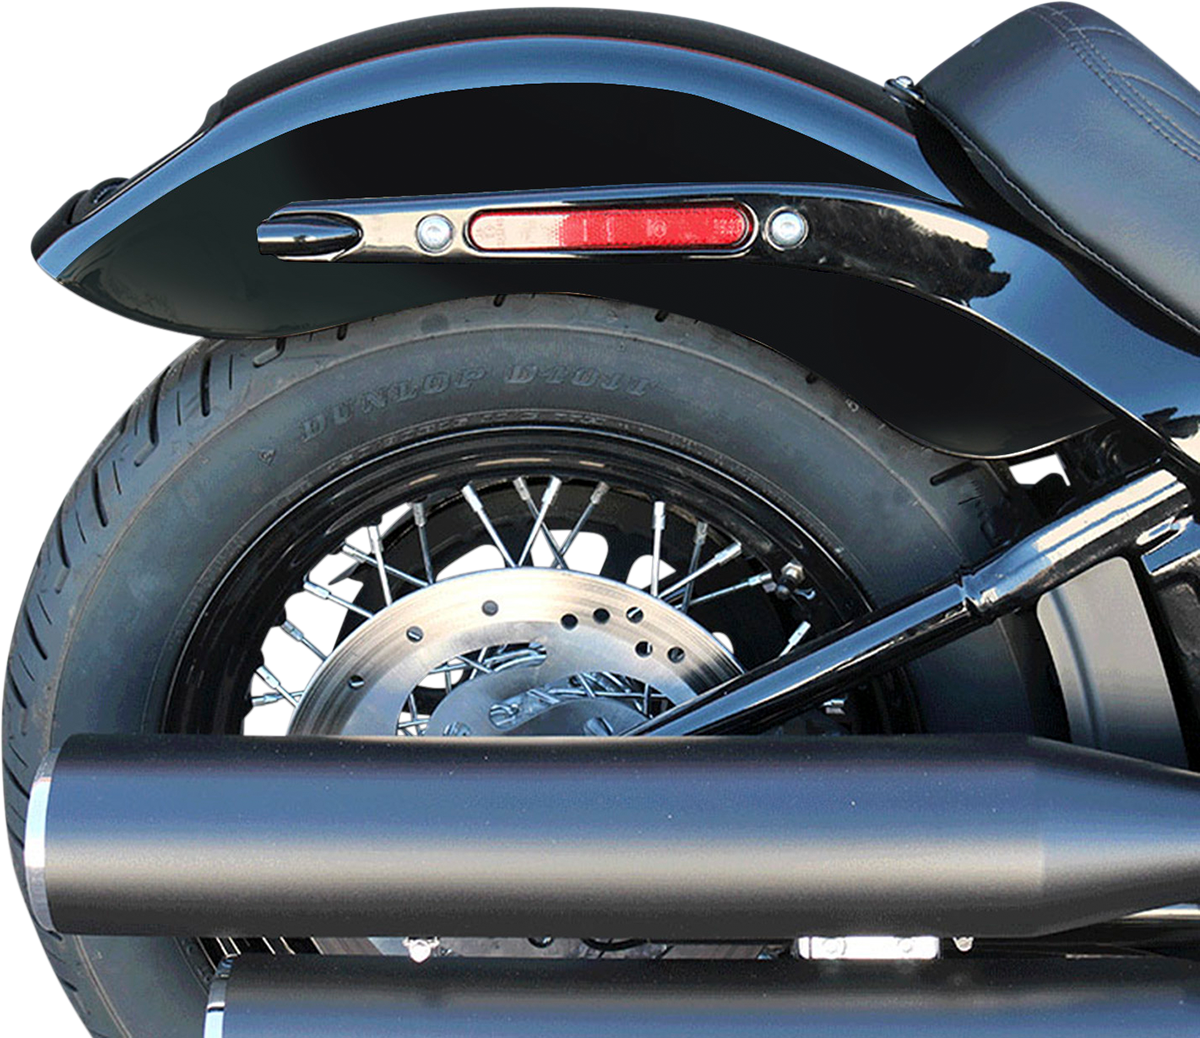 Paul Yaffe Rear Frenched Fender & License Plate Kit 2018-2020 Harley Softail